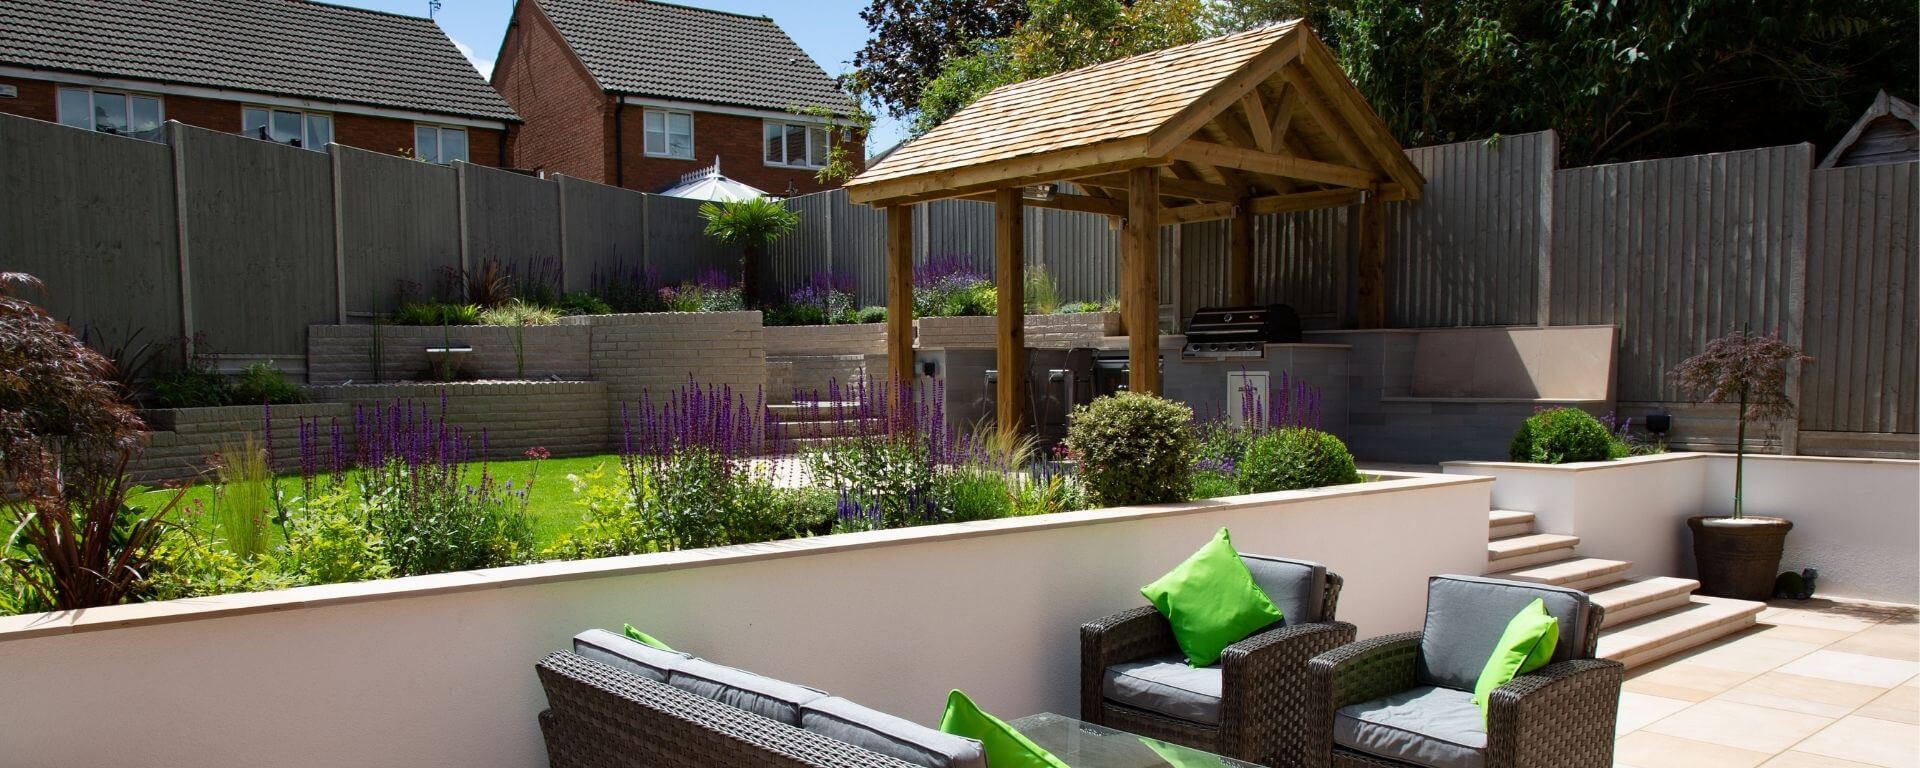 A two tier garden with white rendered walls, outdoor kitchen and fire pit area